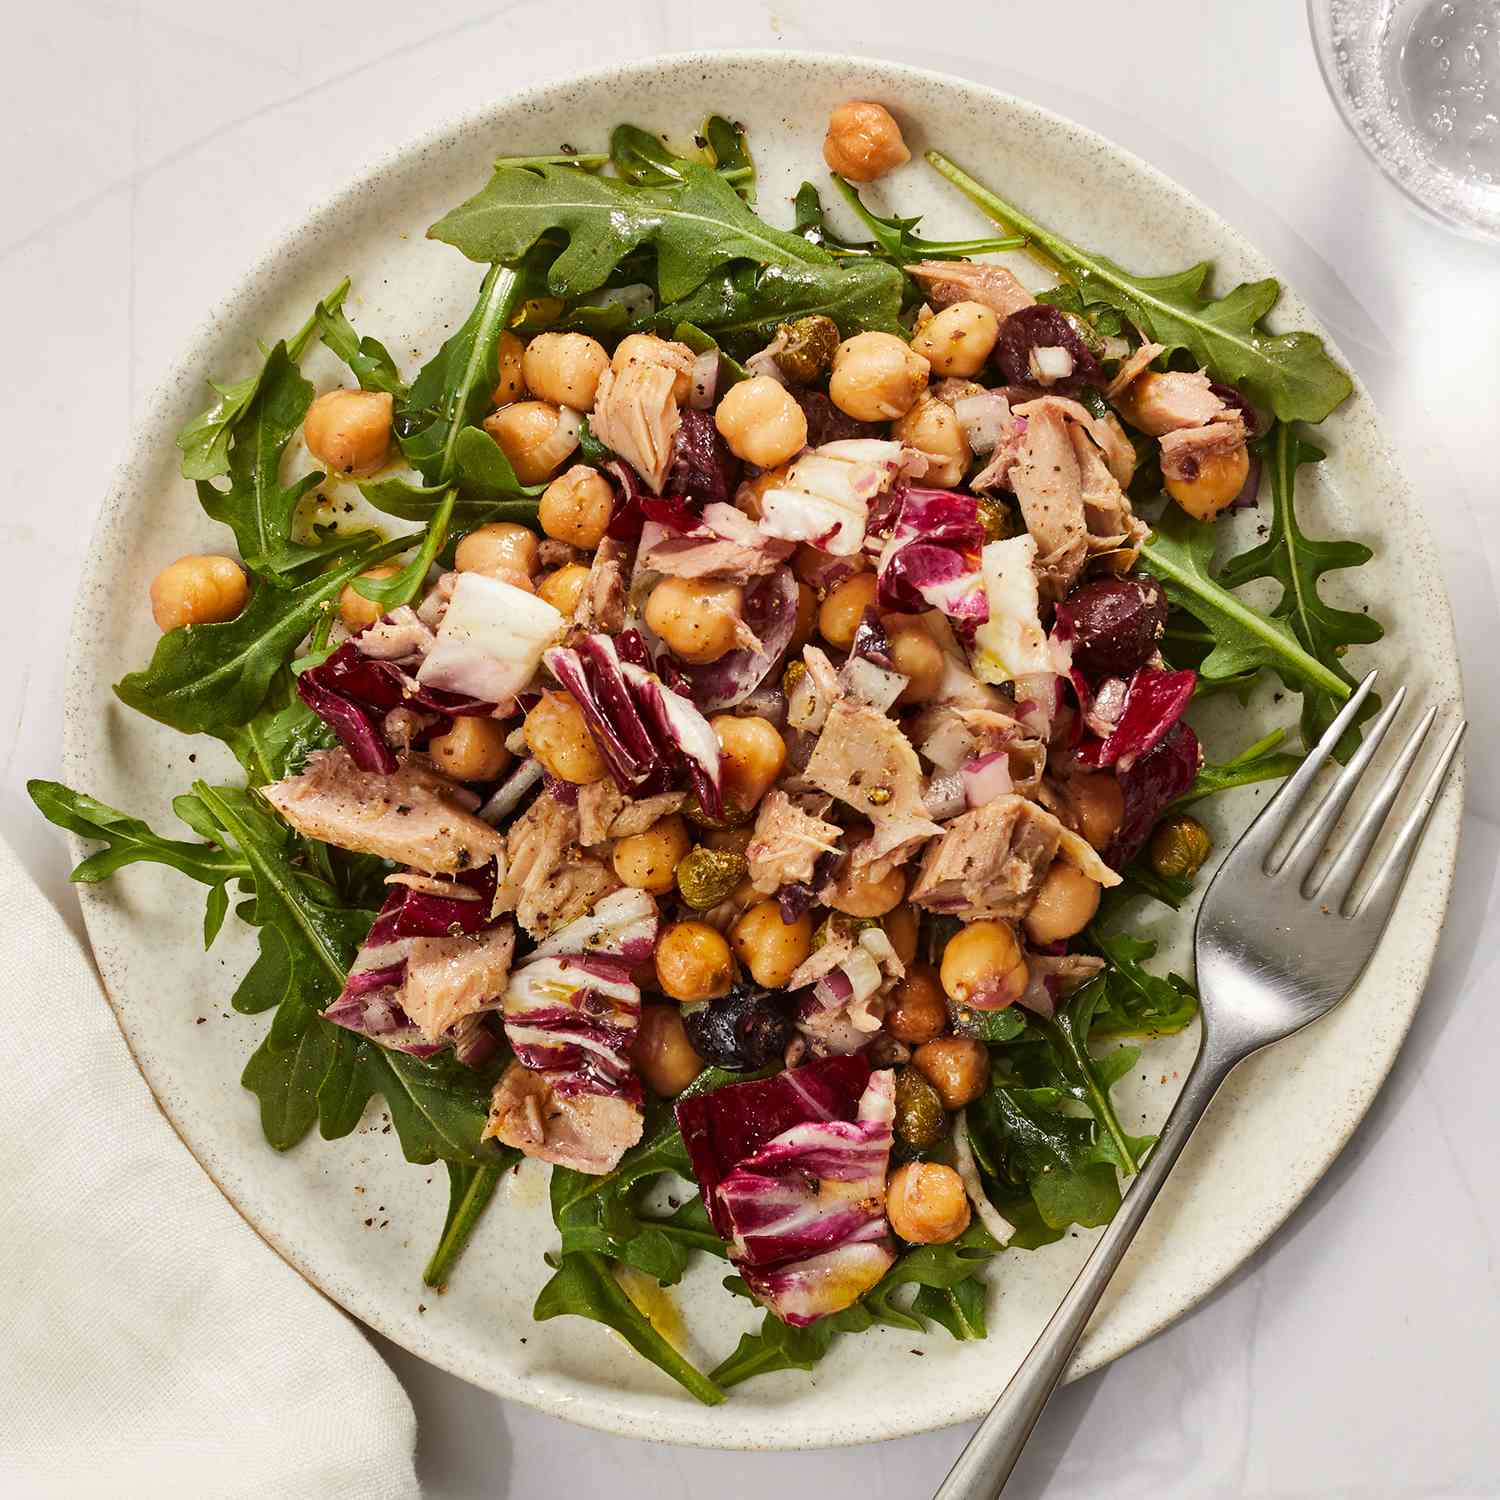 Chickpea-Tuna Salad with greens on a plate